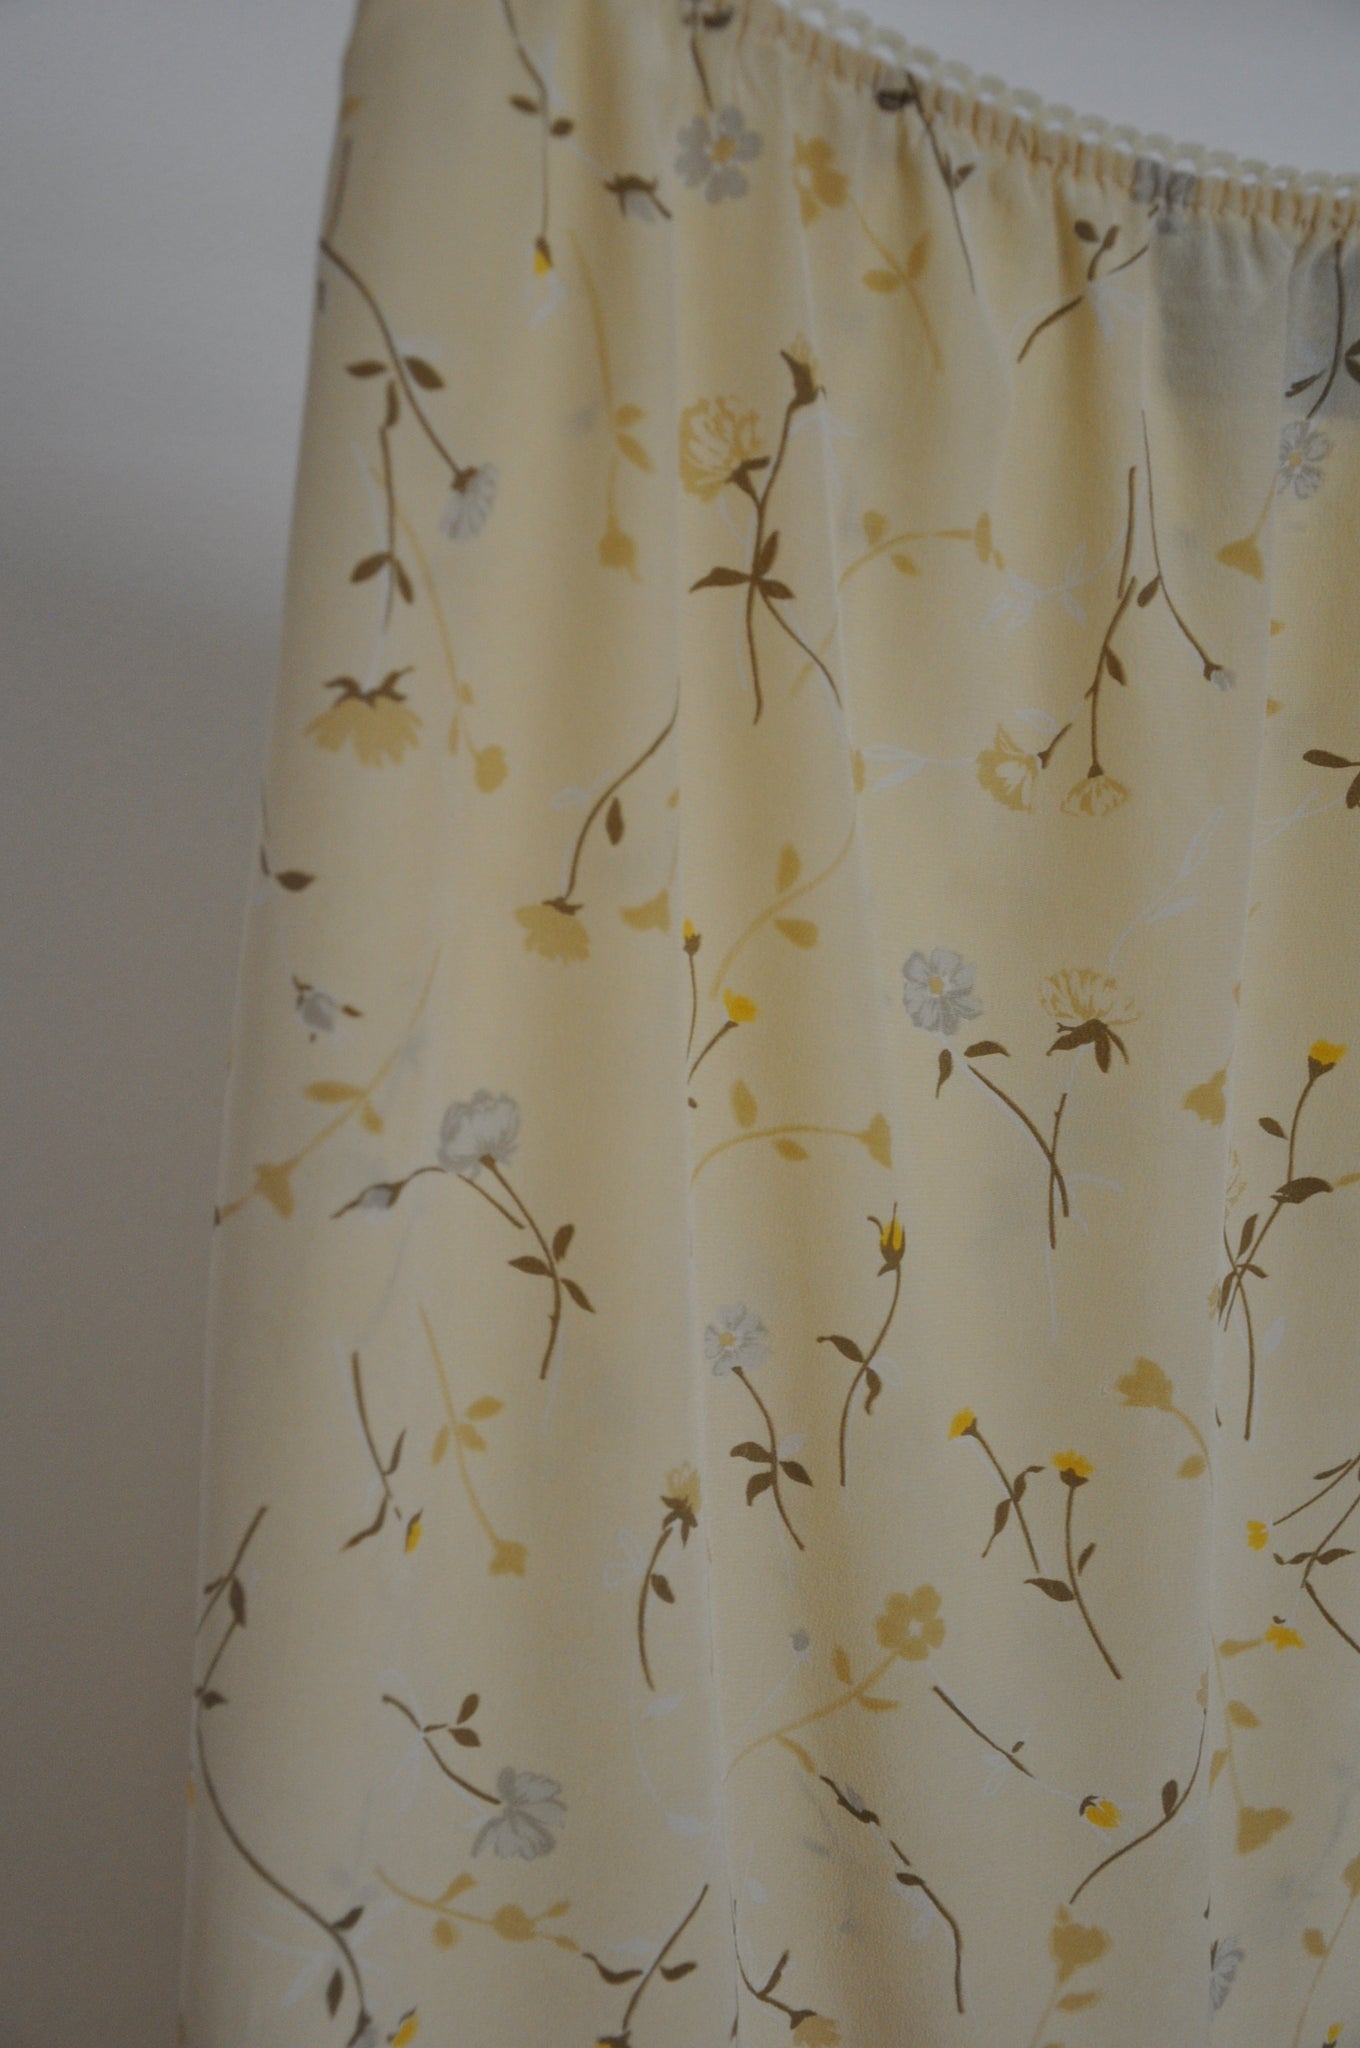 100% silk skirt in pale sun with flowers / S-M